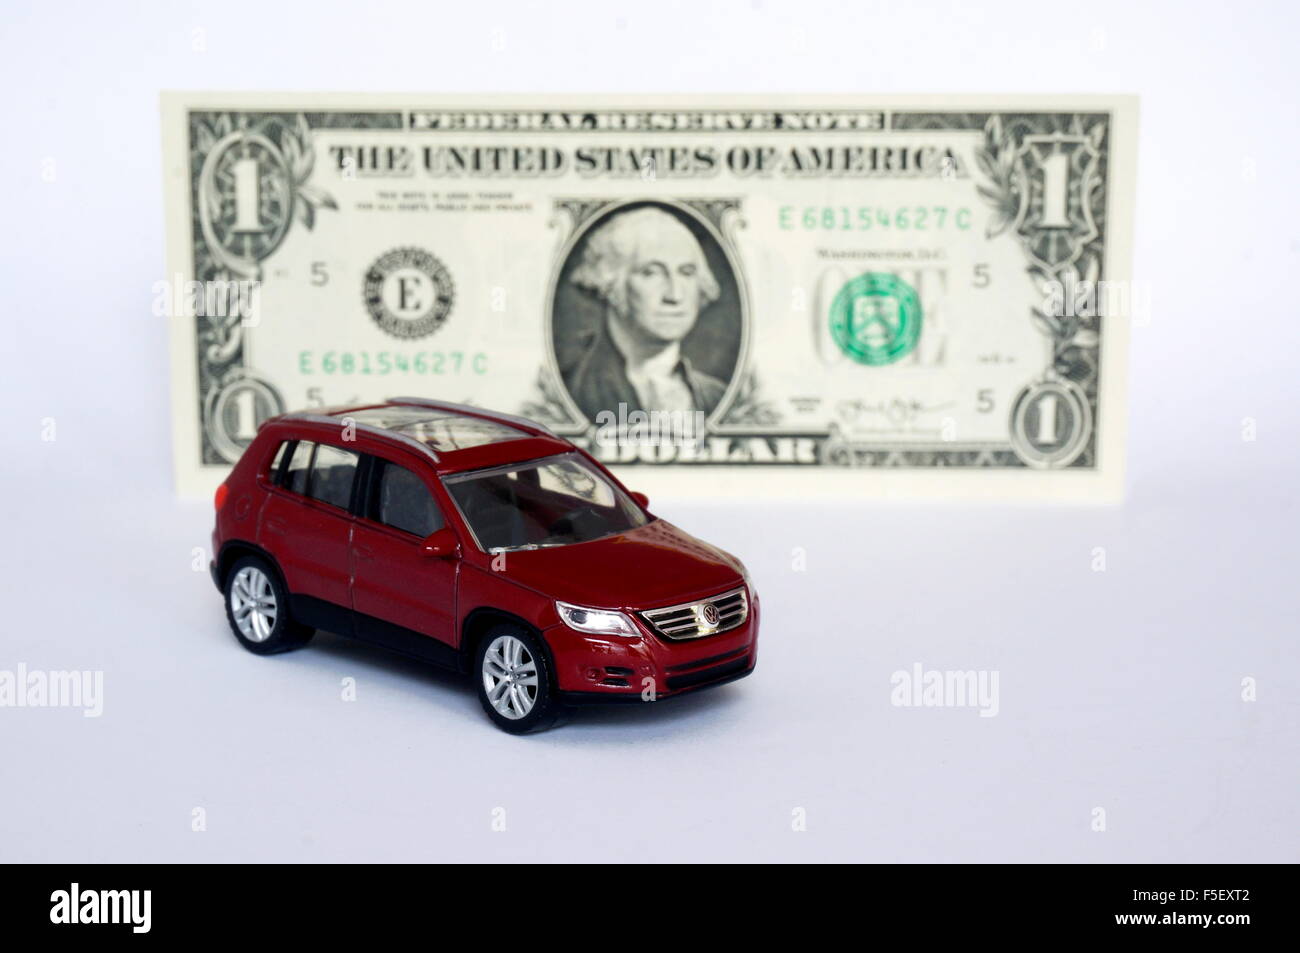 ILLUSTRATION - A Volkswagen car model 'VW Tiguan' in front of a dollar bill. The photo was taken on 15 October 2015. Photo: S. Steinach - NO WIRE SERVICE - Stock Photo